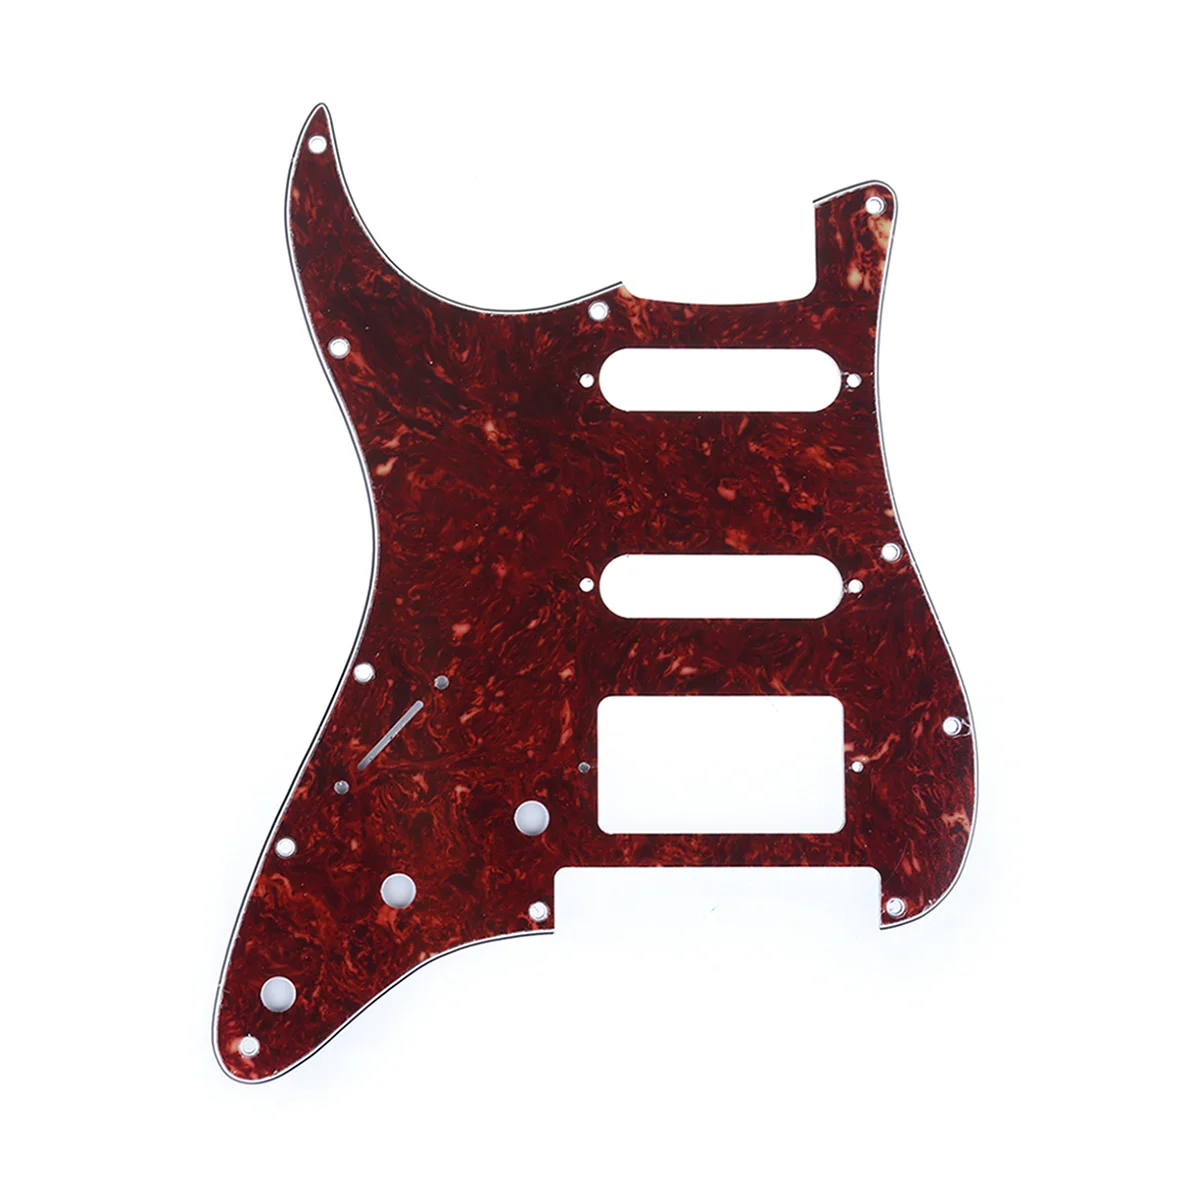 Musiclily Pro Left Handed 11-Hole Strat HSS Guitar Pickguard for USA/Mexican Strat Floyd Rose Bridge Cut, 4Ply Vintage Tortoise